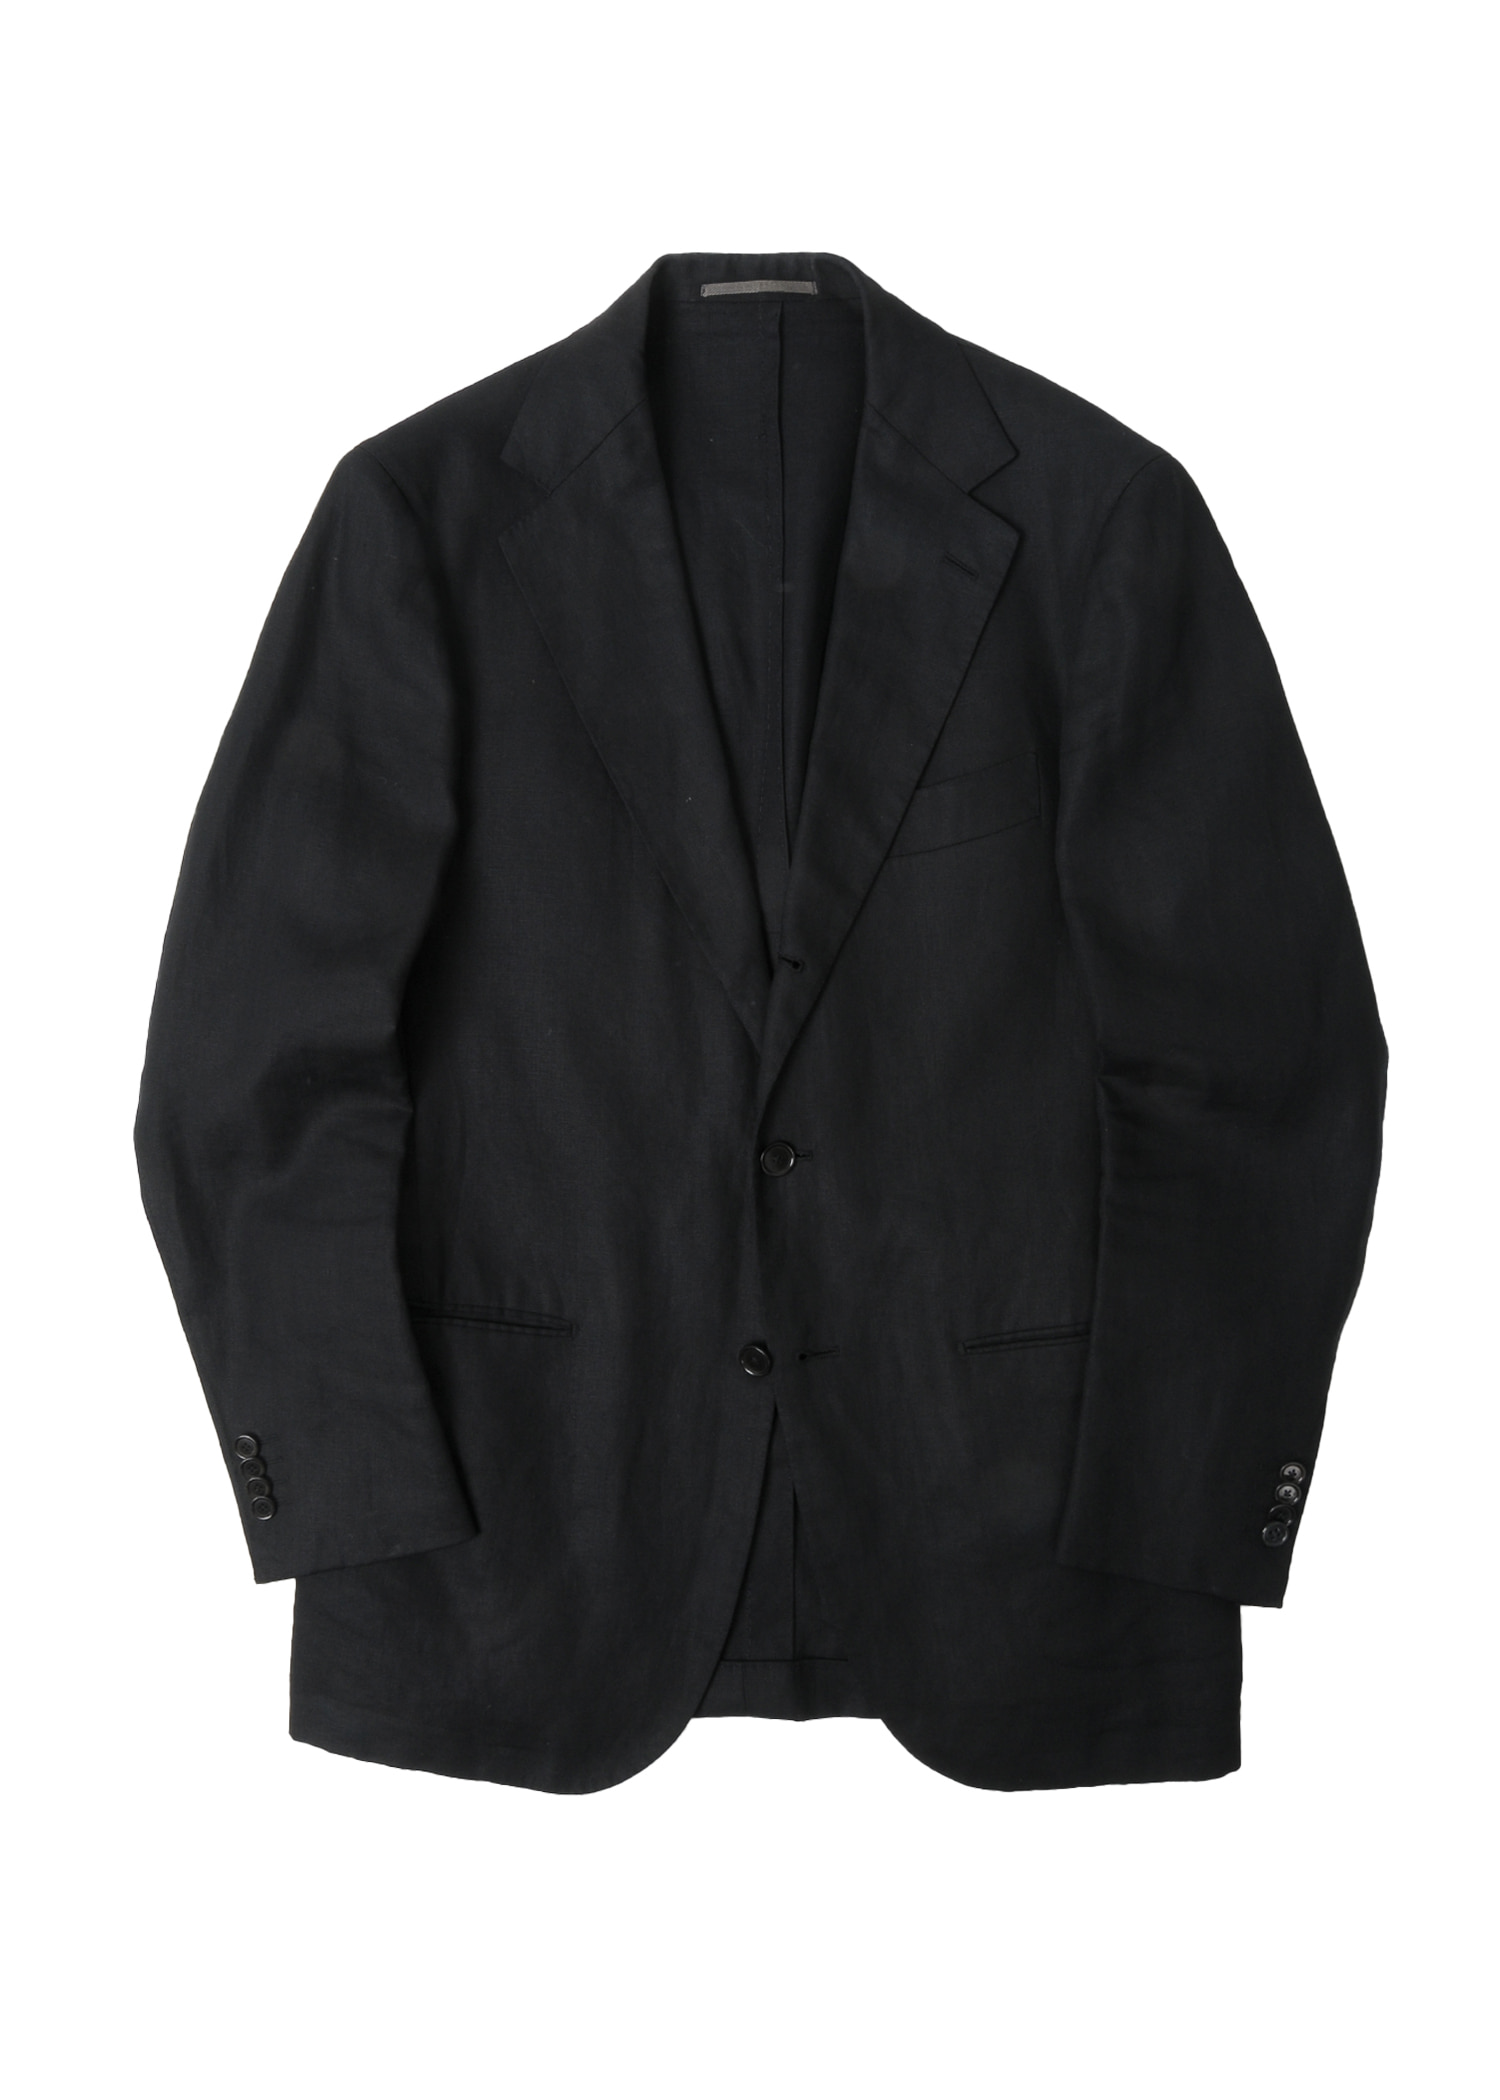 SOVEREIGN by UNITED ARROWS linen jacket